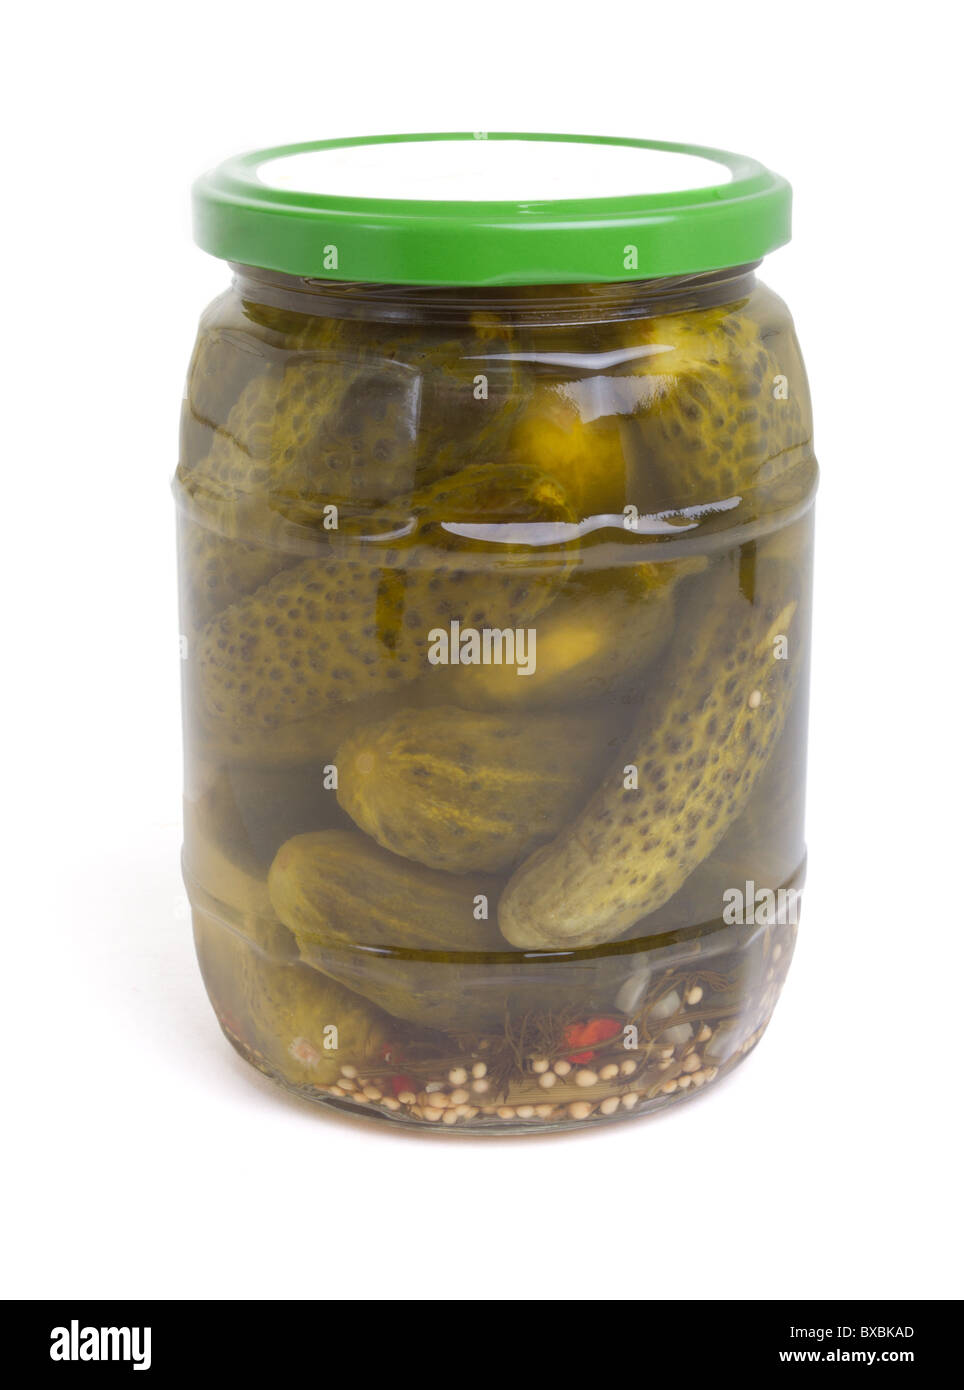 Jar of Gherkins or dill pickle isolated on white. Stock Photo